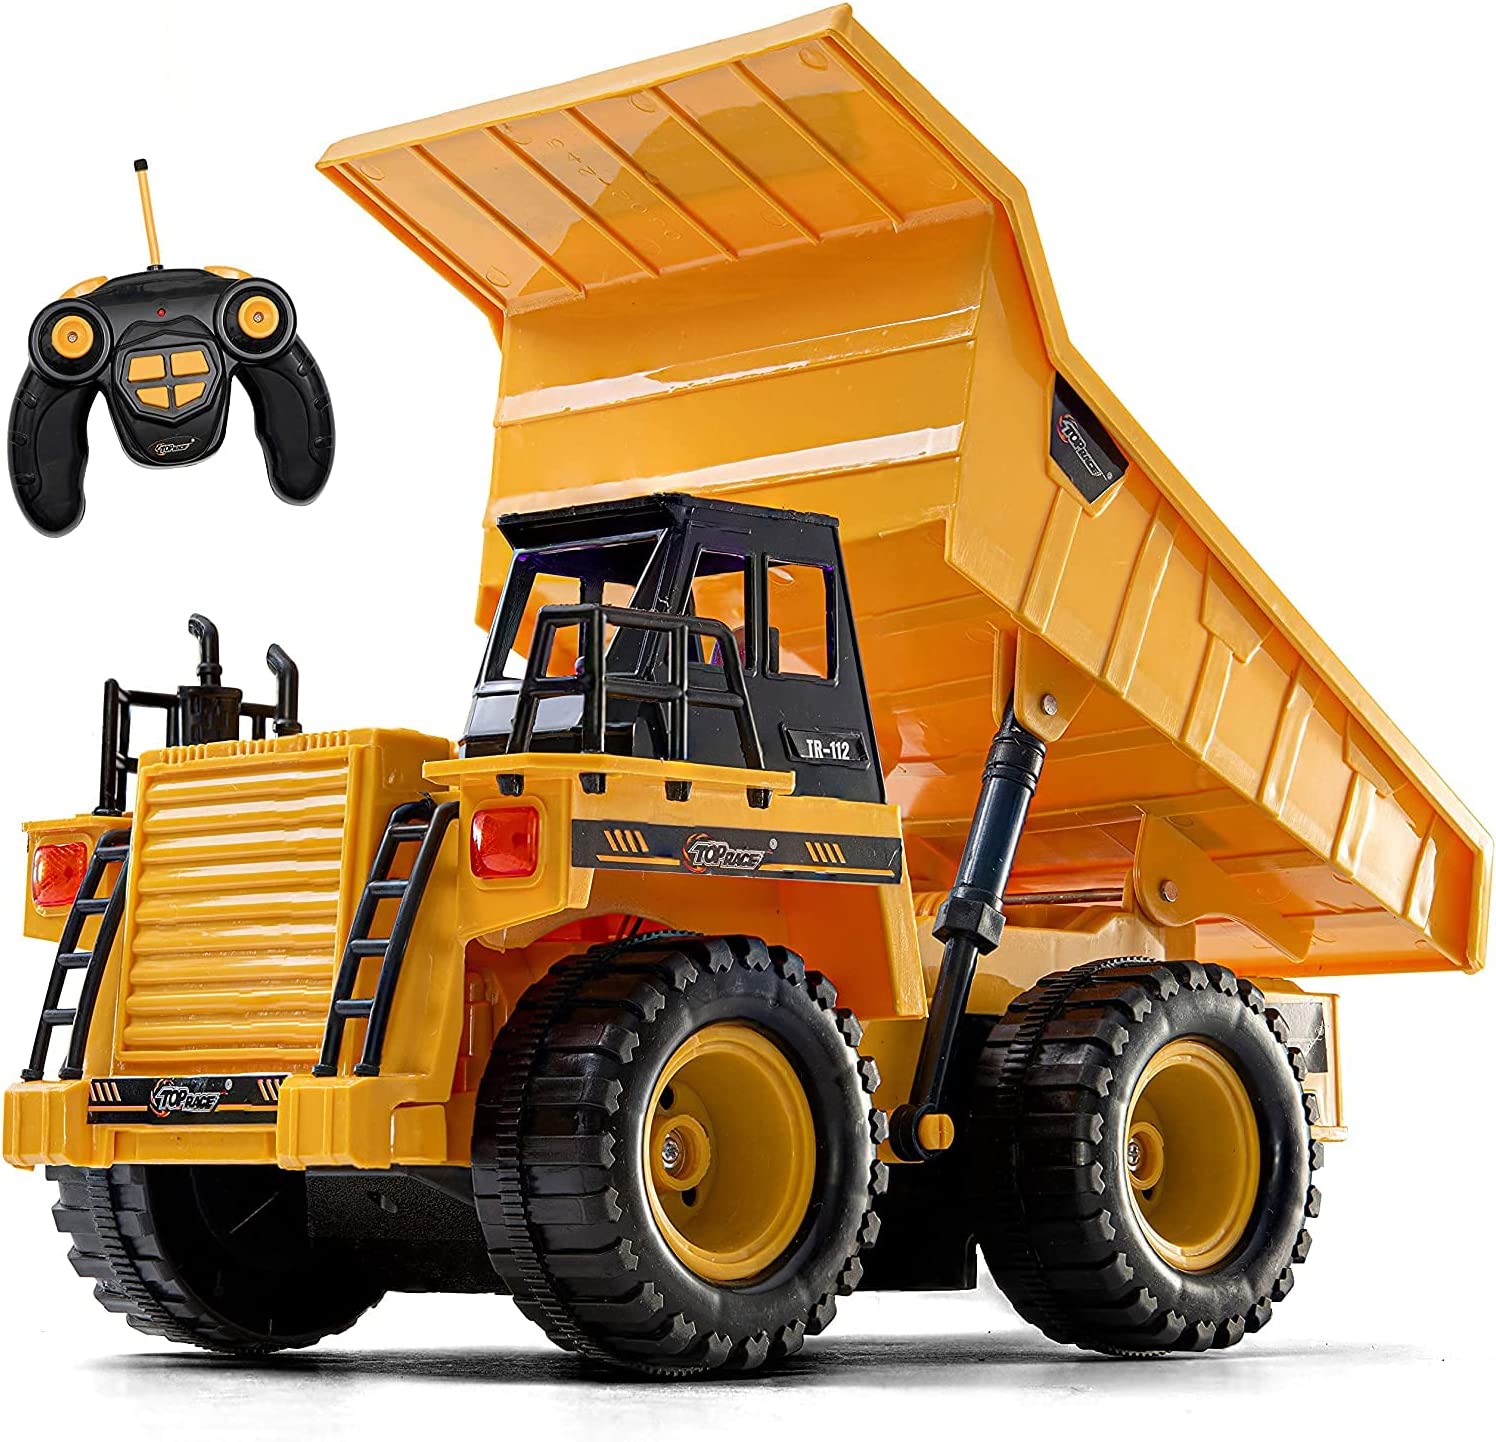 Top Race Remote Control Construction Dump Truck Toy, RC Dump Truck Toys, Construction Toys Vehicle, RC Truck Toys for 8,9,10,11,12 Year Old Boys and up